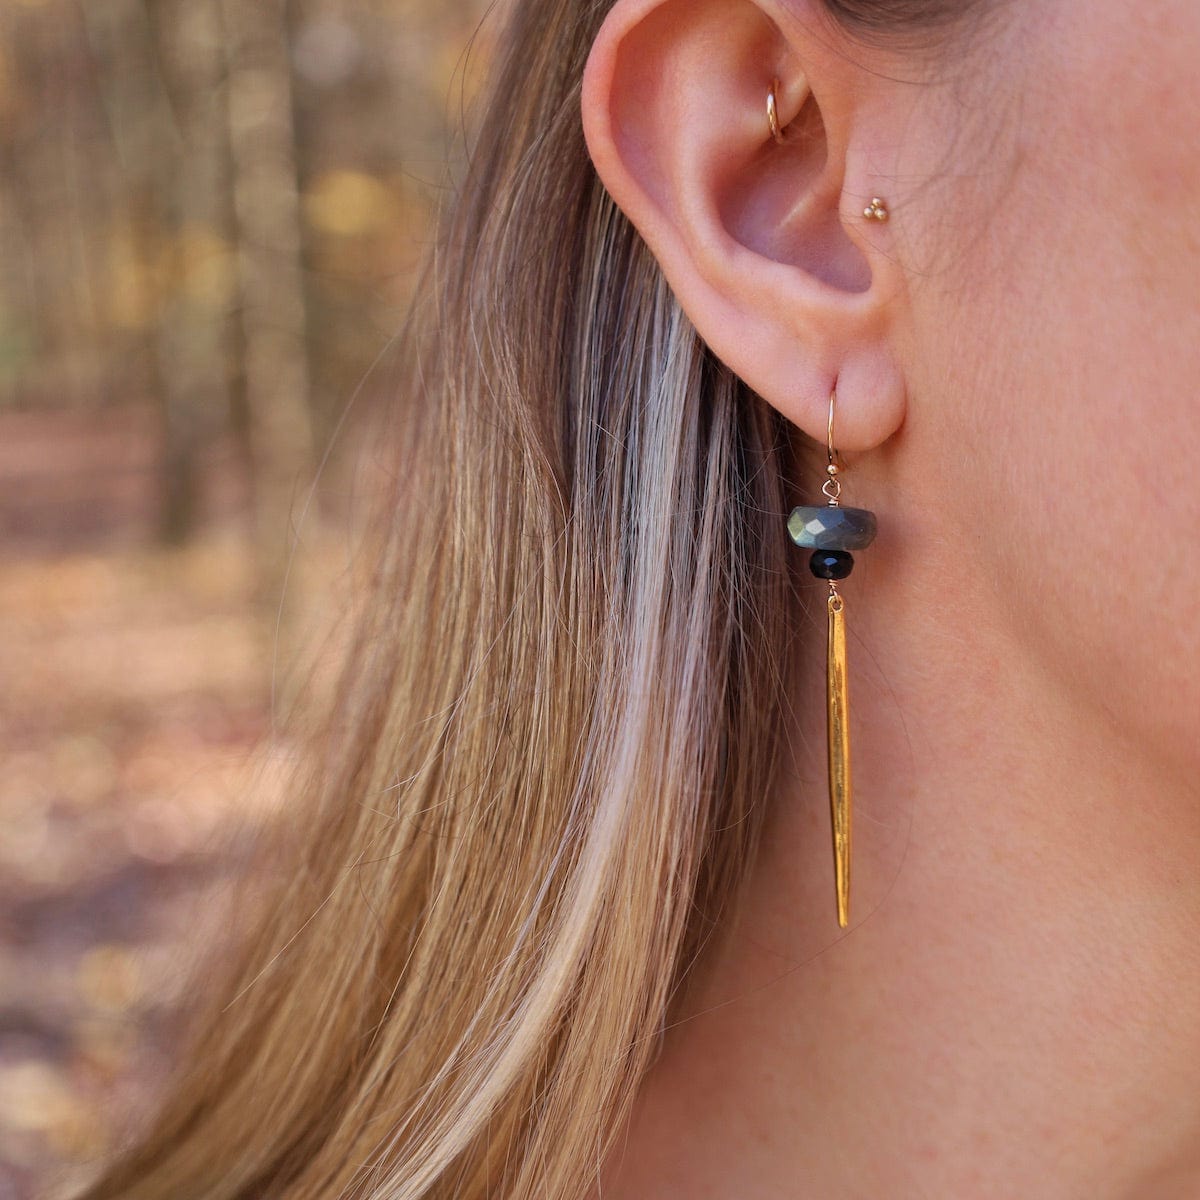 NKL-GF Icicle Earrings with Flat Semi Precious Stones - L